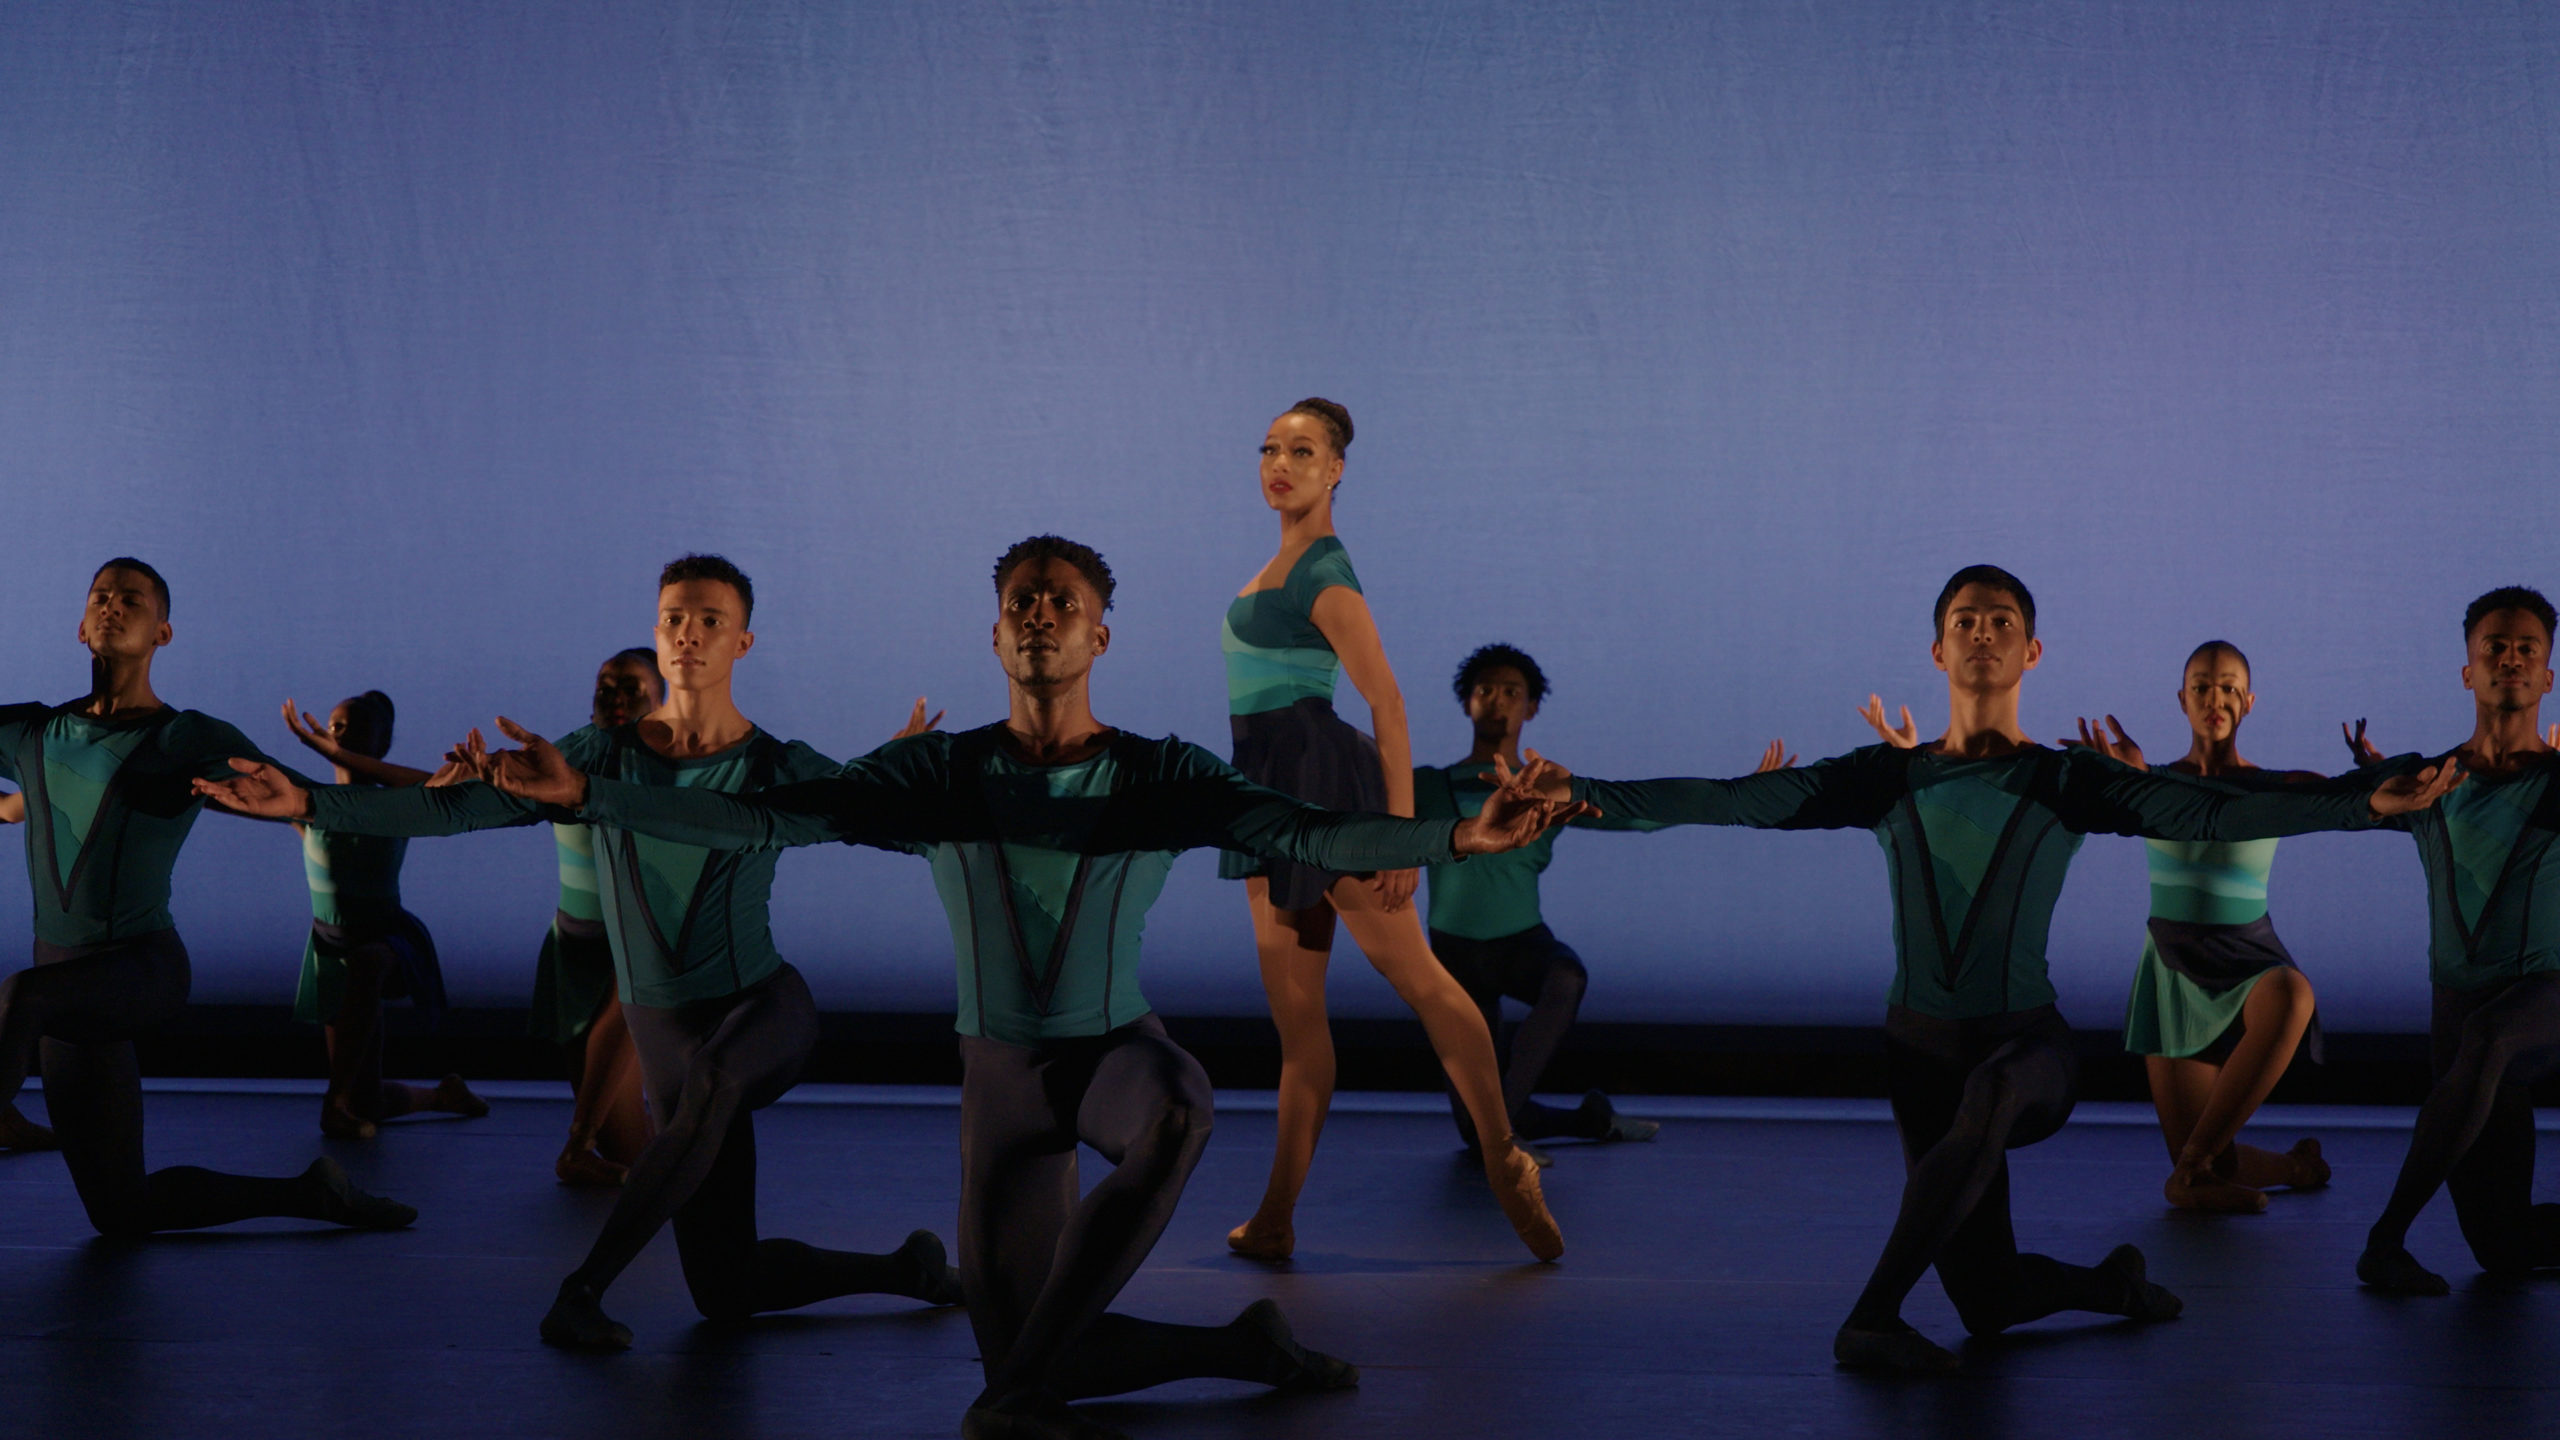 During a performance, a group of dancers form a circle onstage and kneel on their right leg with their arms outstretched to the side. In the middle, a female dancer stands in profile facing stage right with her left leg in tendu derriere and her arms low. She looks out towards the audience. All the dancers wear turqoise and blue costumes, the men in tights, tunics and ballet slippers and the women in short dance dresses and brown pointe shoes.